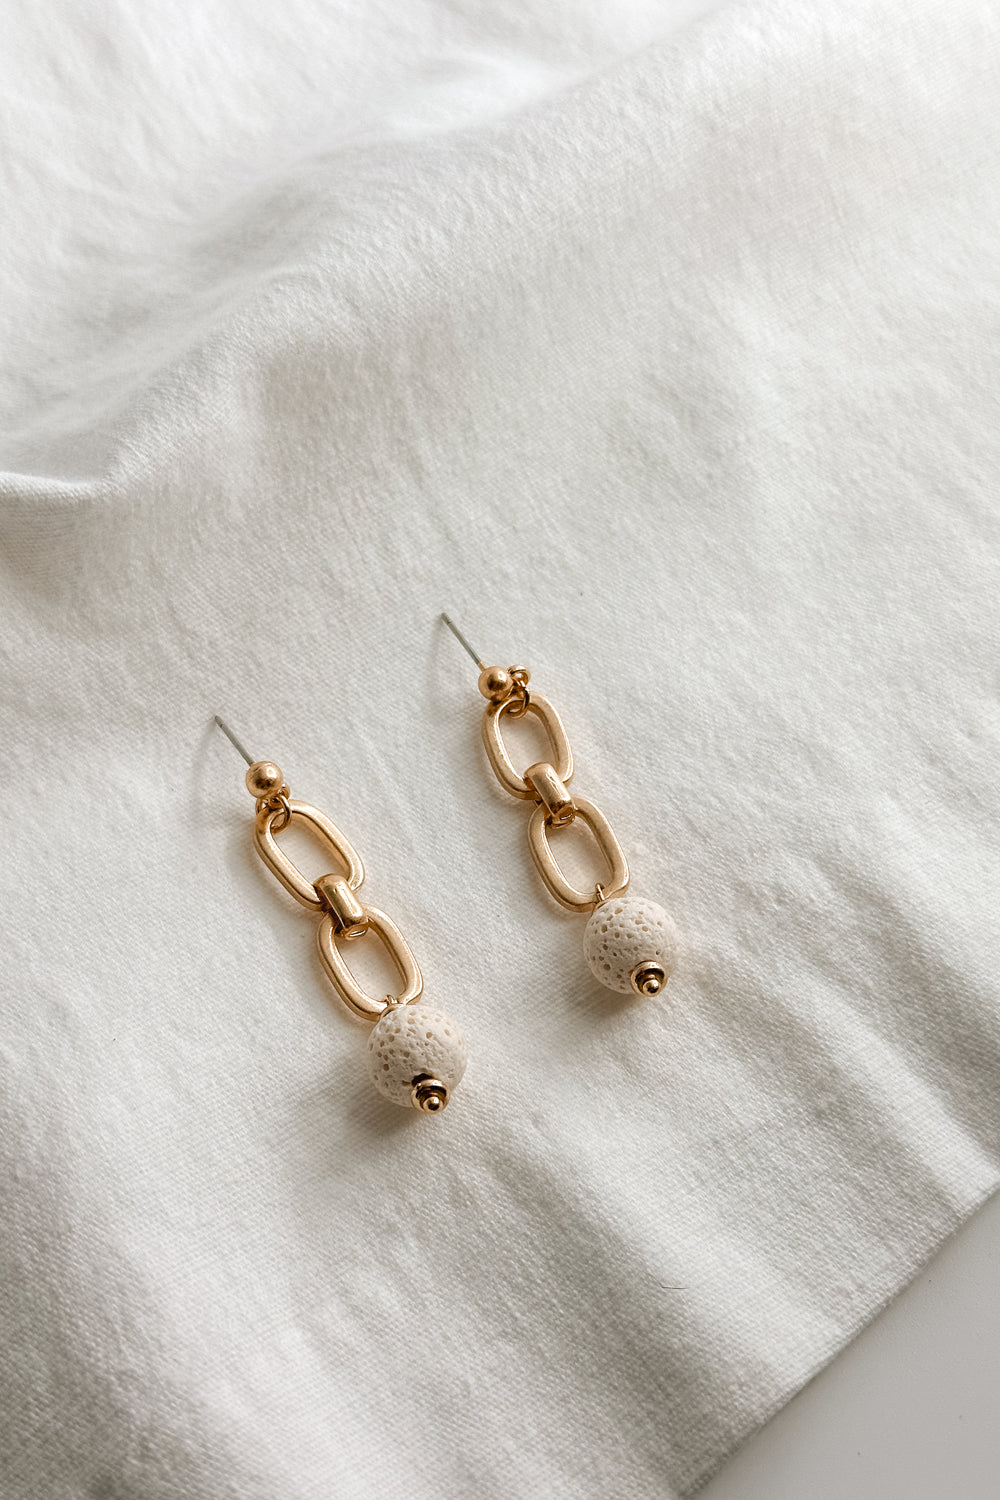 FLat lay view of the Rhodes Gold & Cream Chain Dangle Earring which features gold chain link dangle earrings with cream textured beads